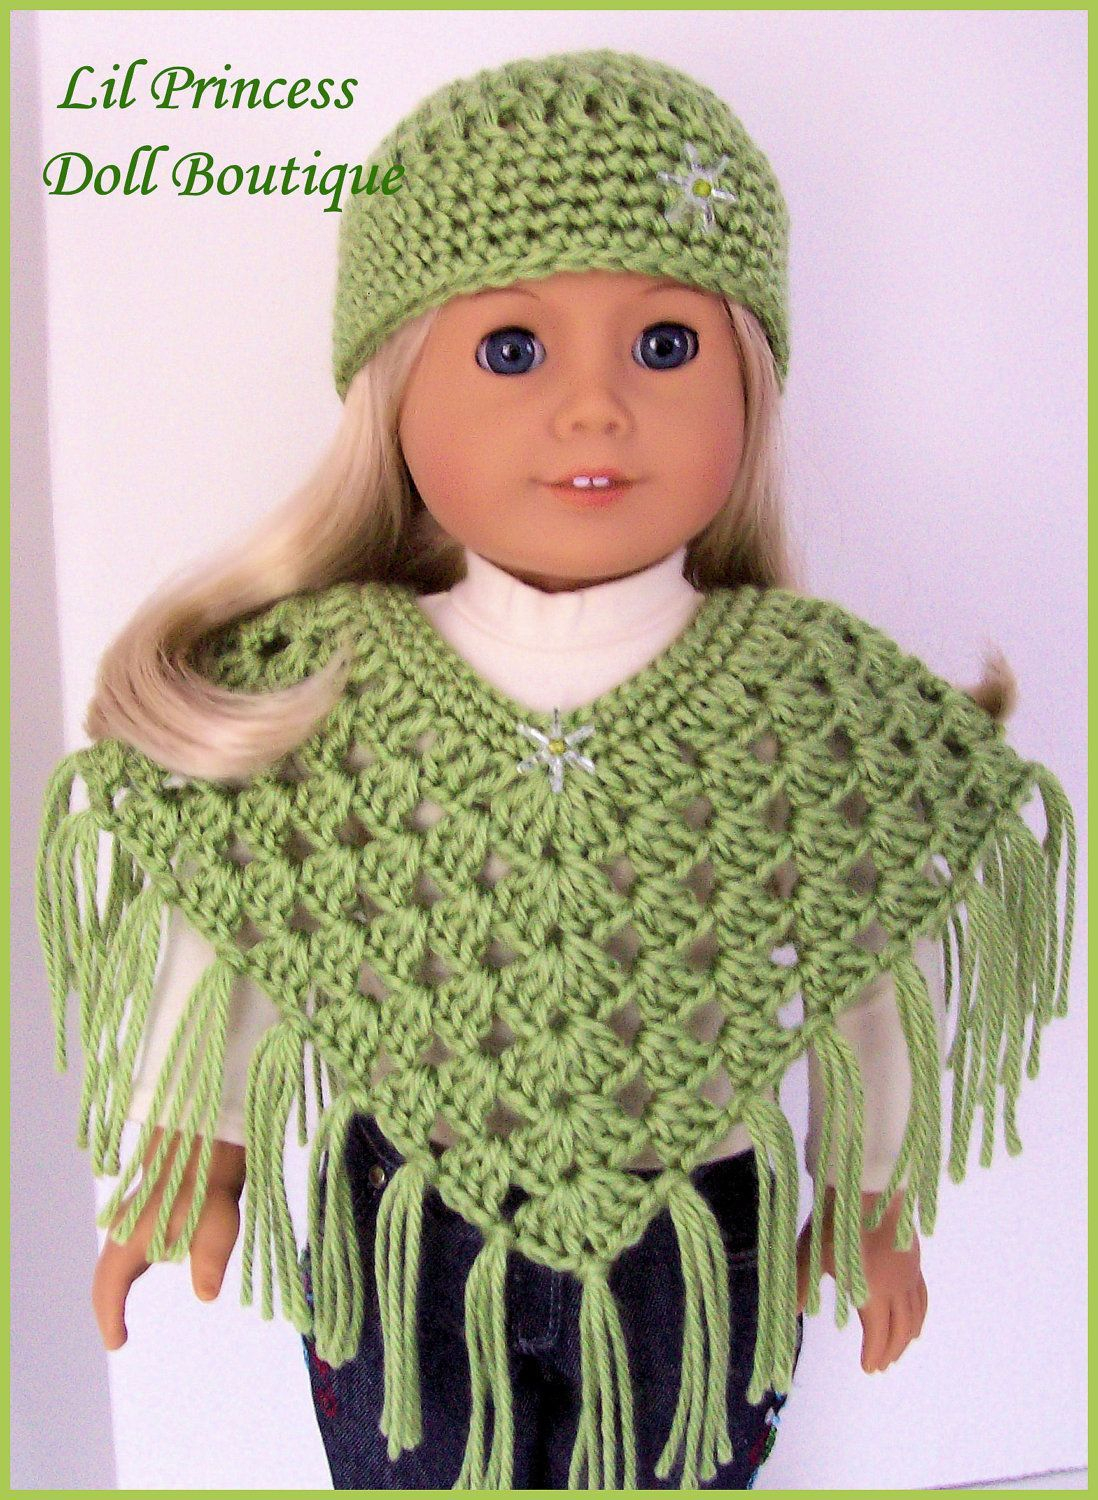 Crochet Doll Clothes Patterns Repurpose A Ba Shirt And Make A Doll Dress Doll It Up Hooked